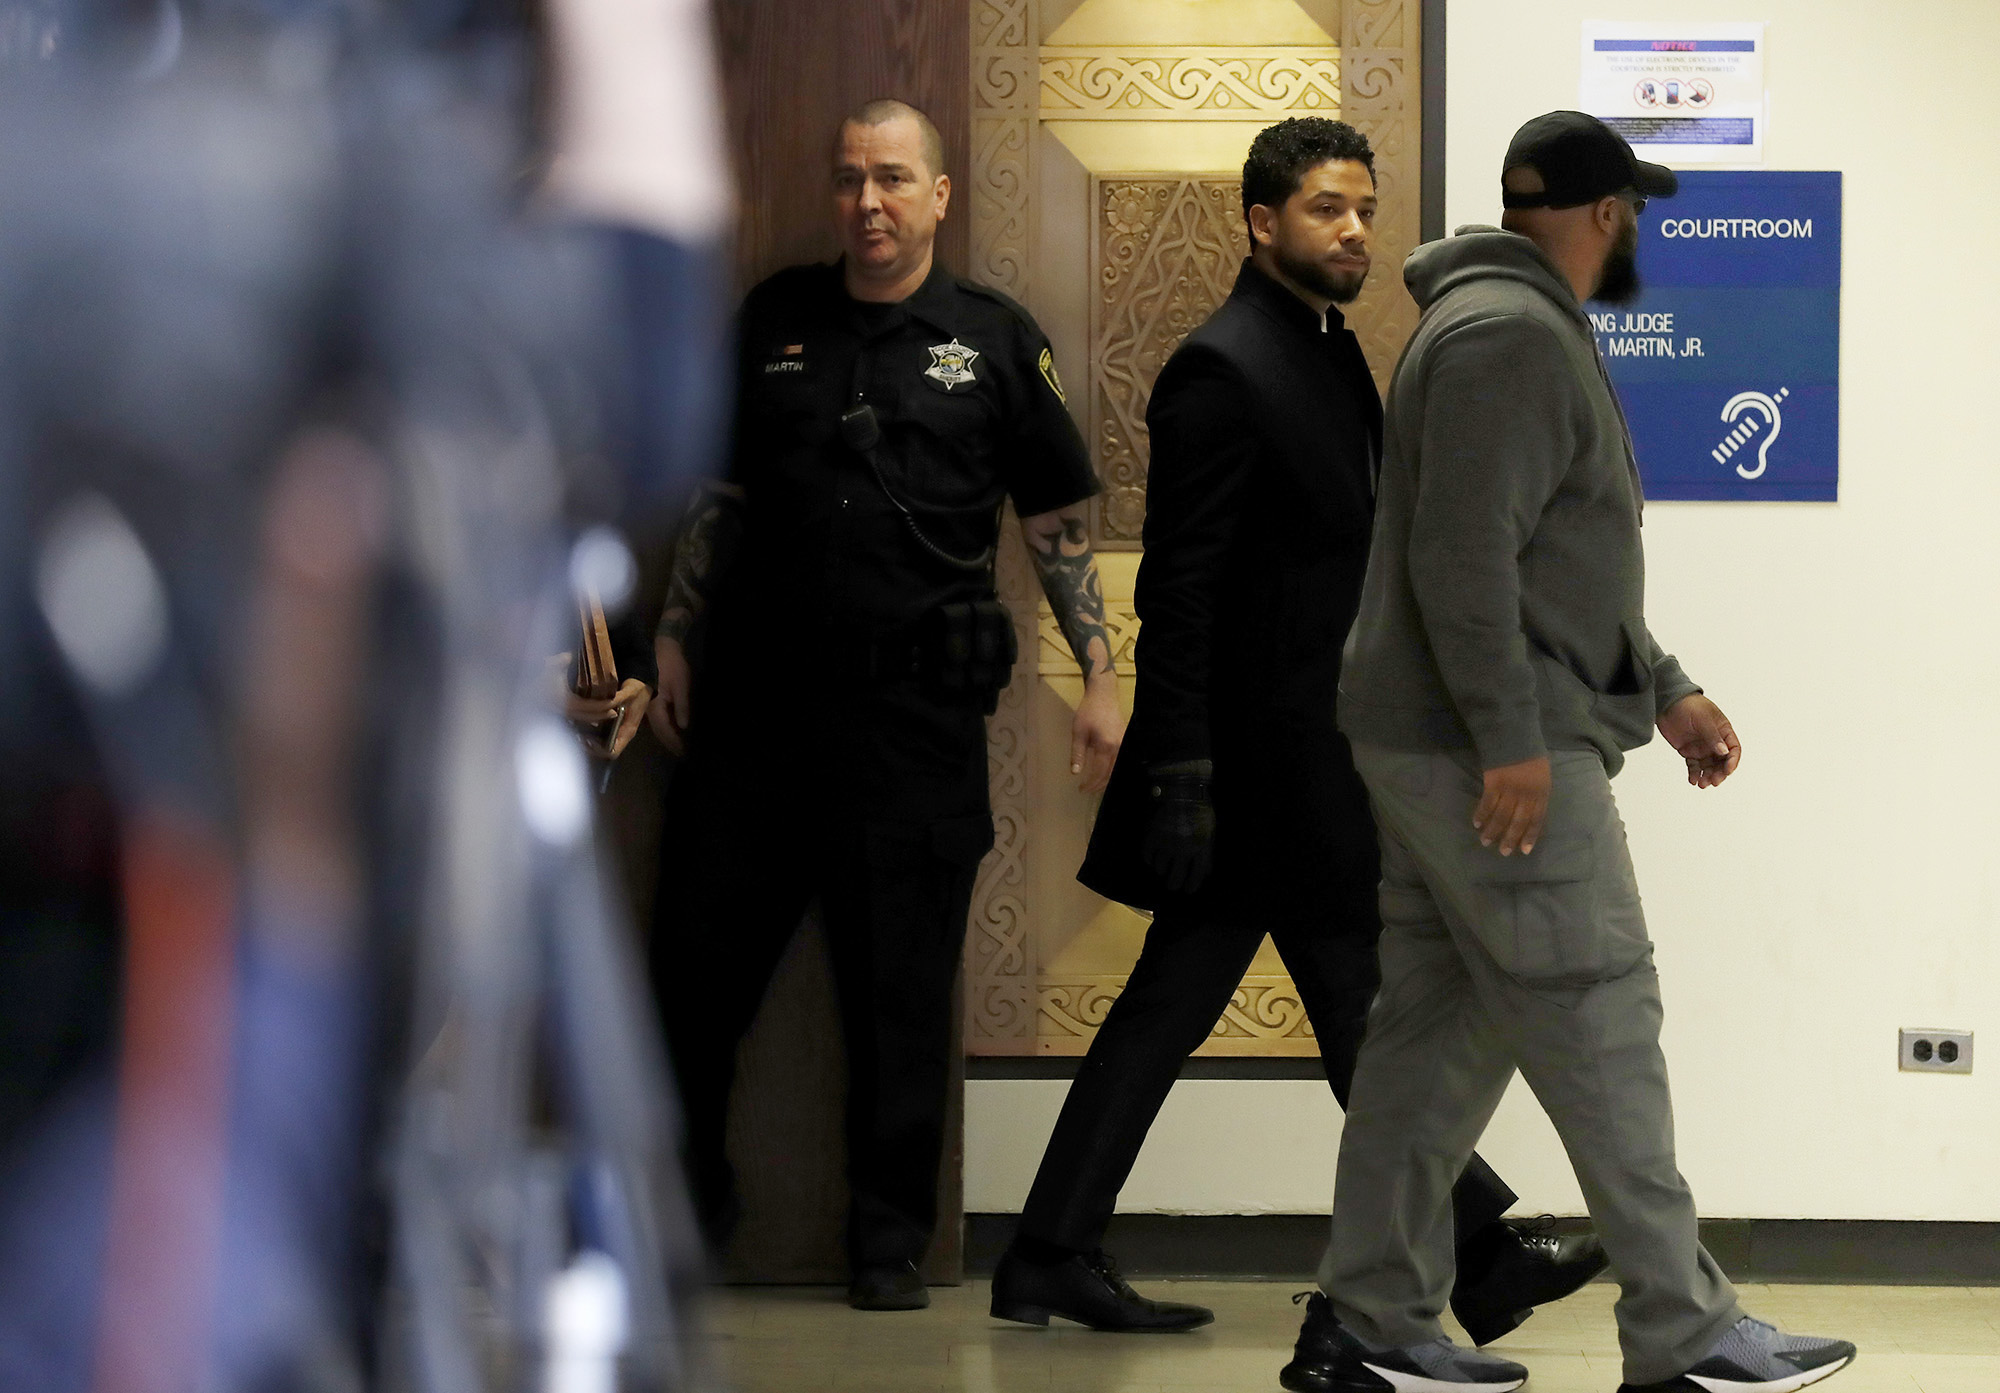 PHOTO: Actor Jussie Smollett exits courtroom 101 into the hallway at the Leighton Criminal Court Building following an emergency hearing over his disorderly conduct charges on March 26, 2019.